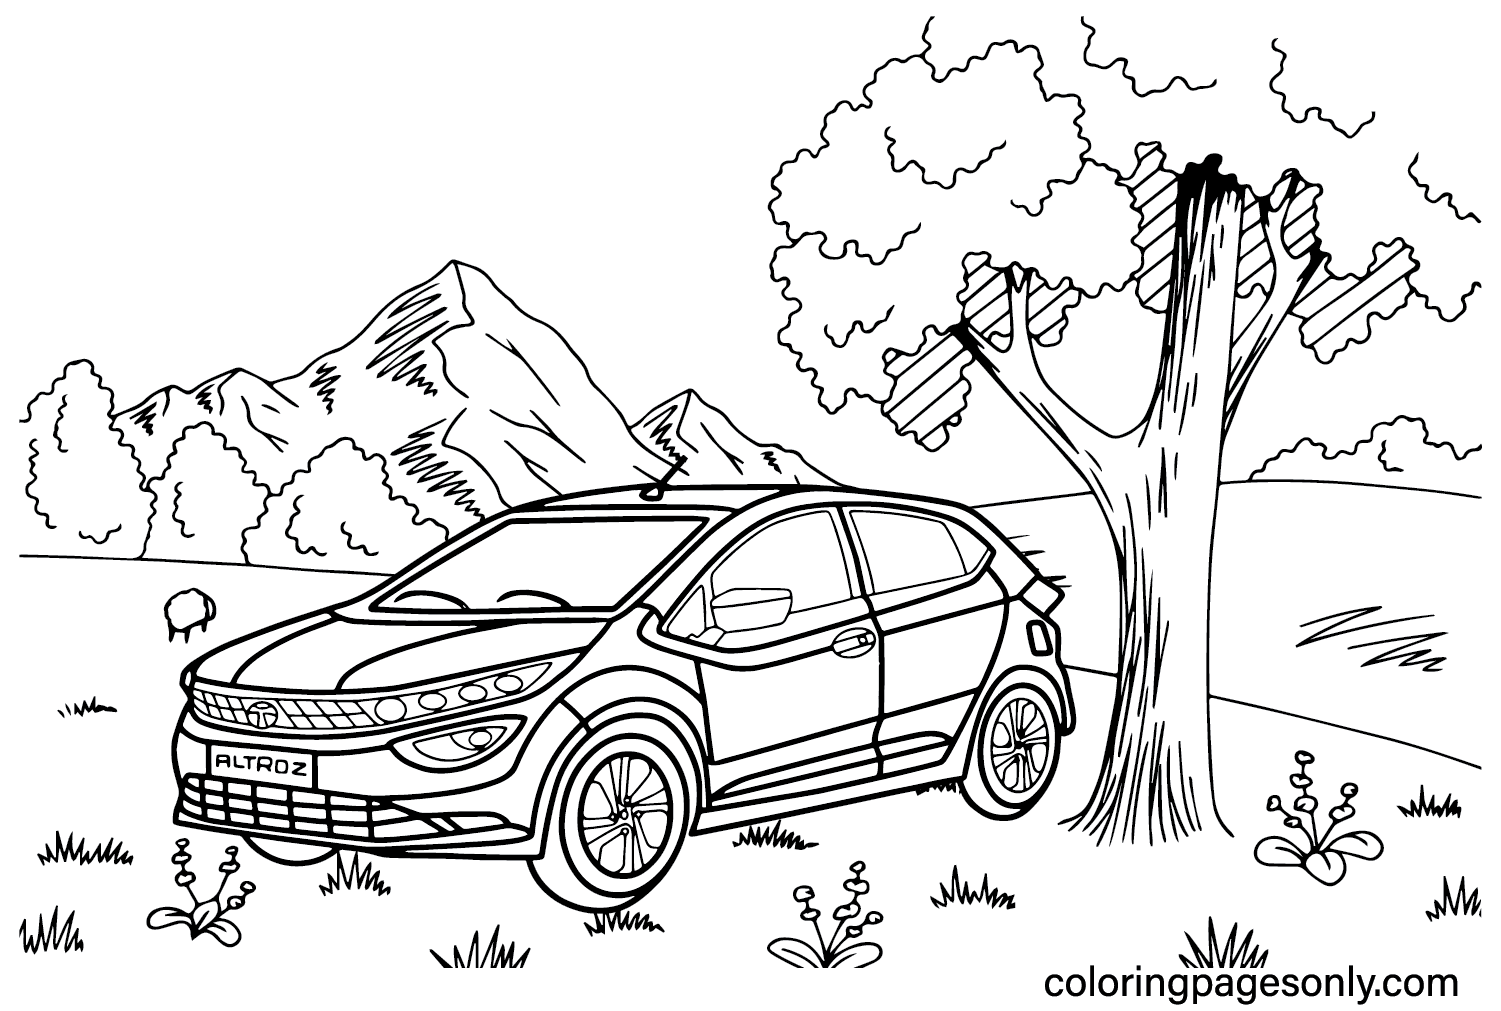 Tata Altroz Coloring Page from Tata